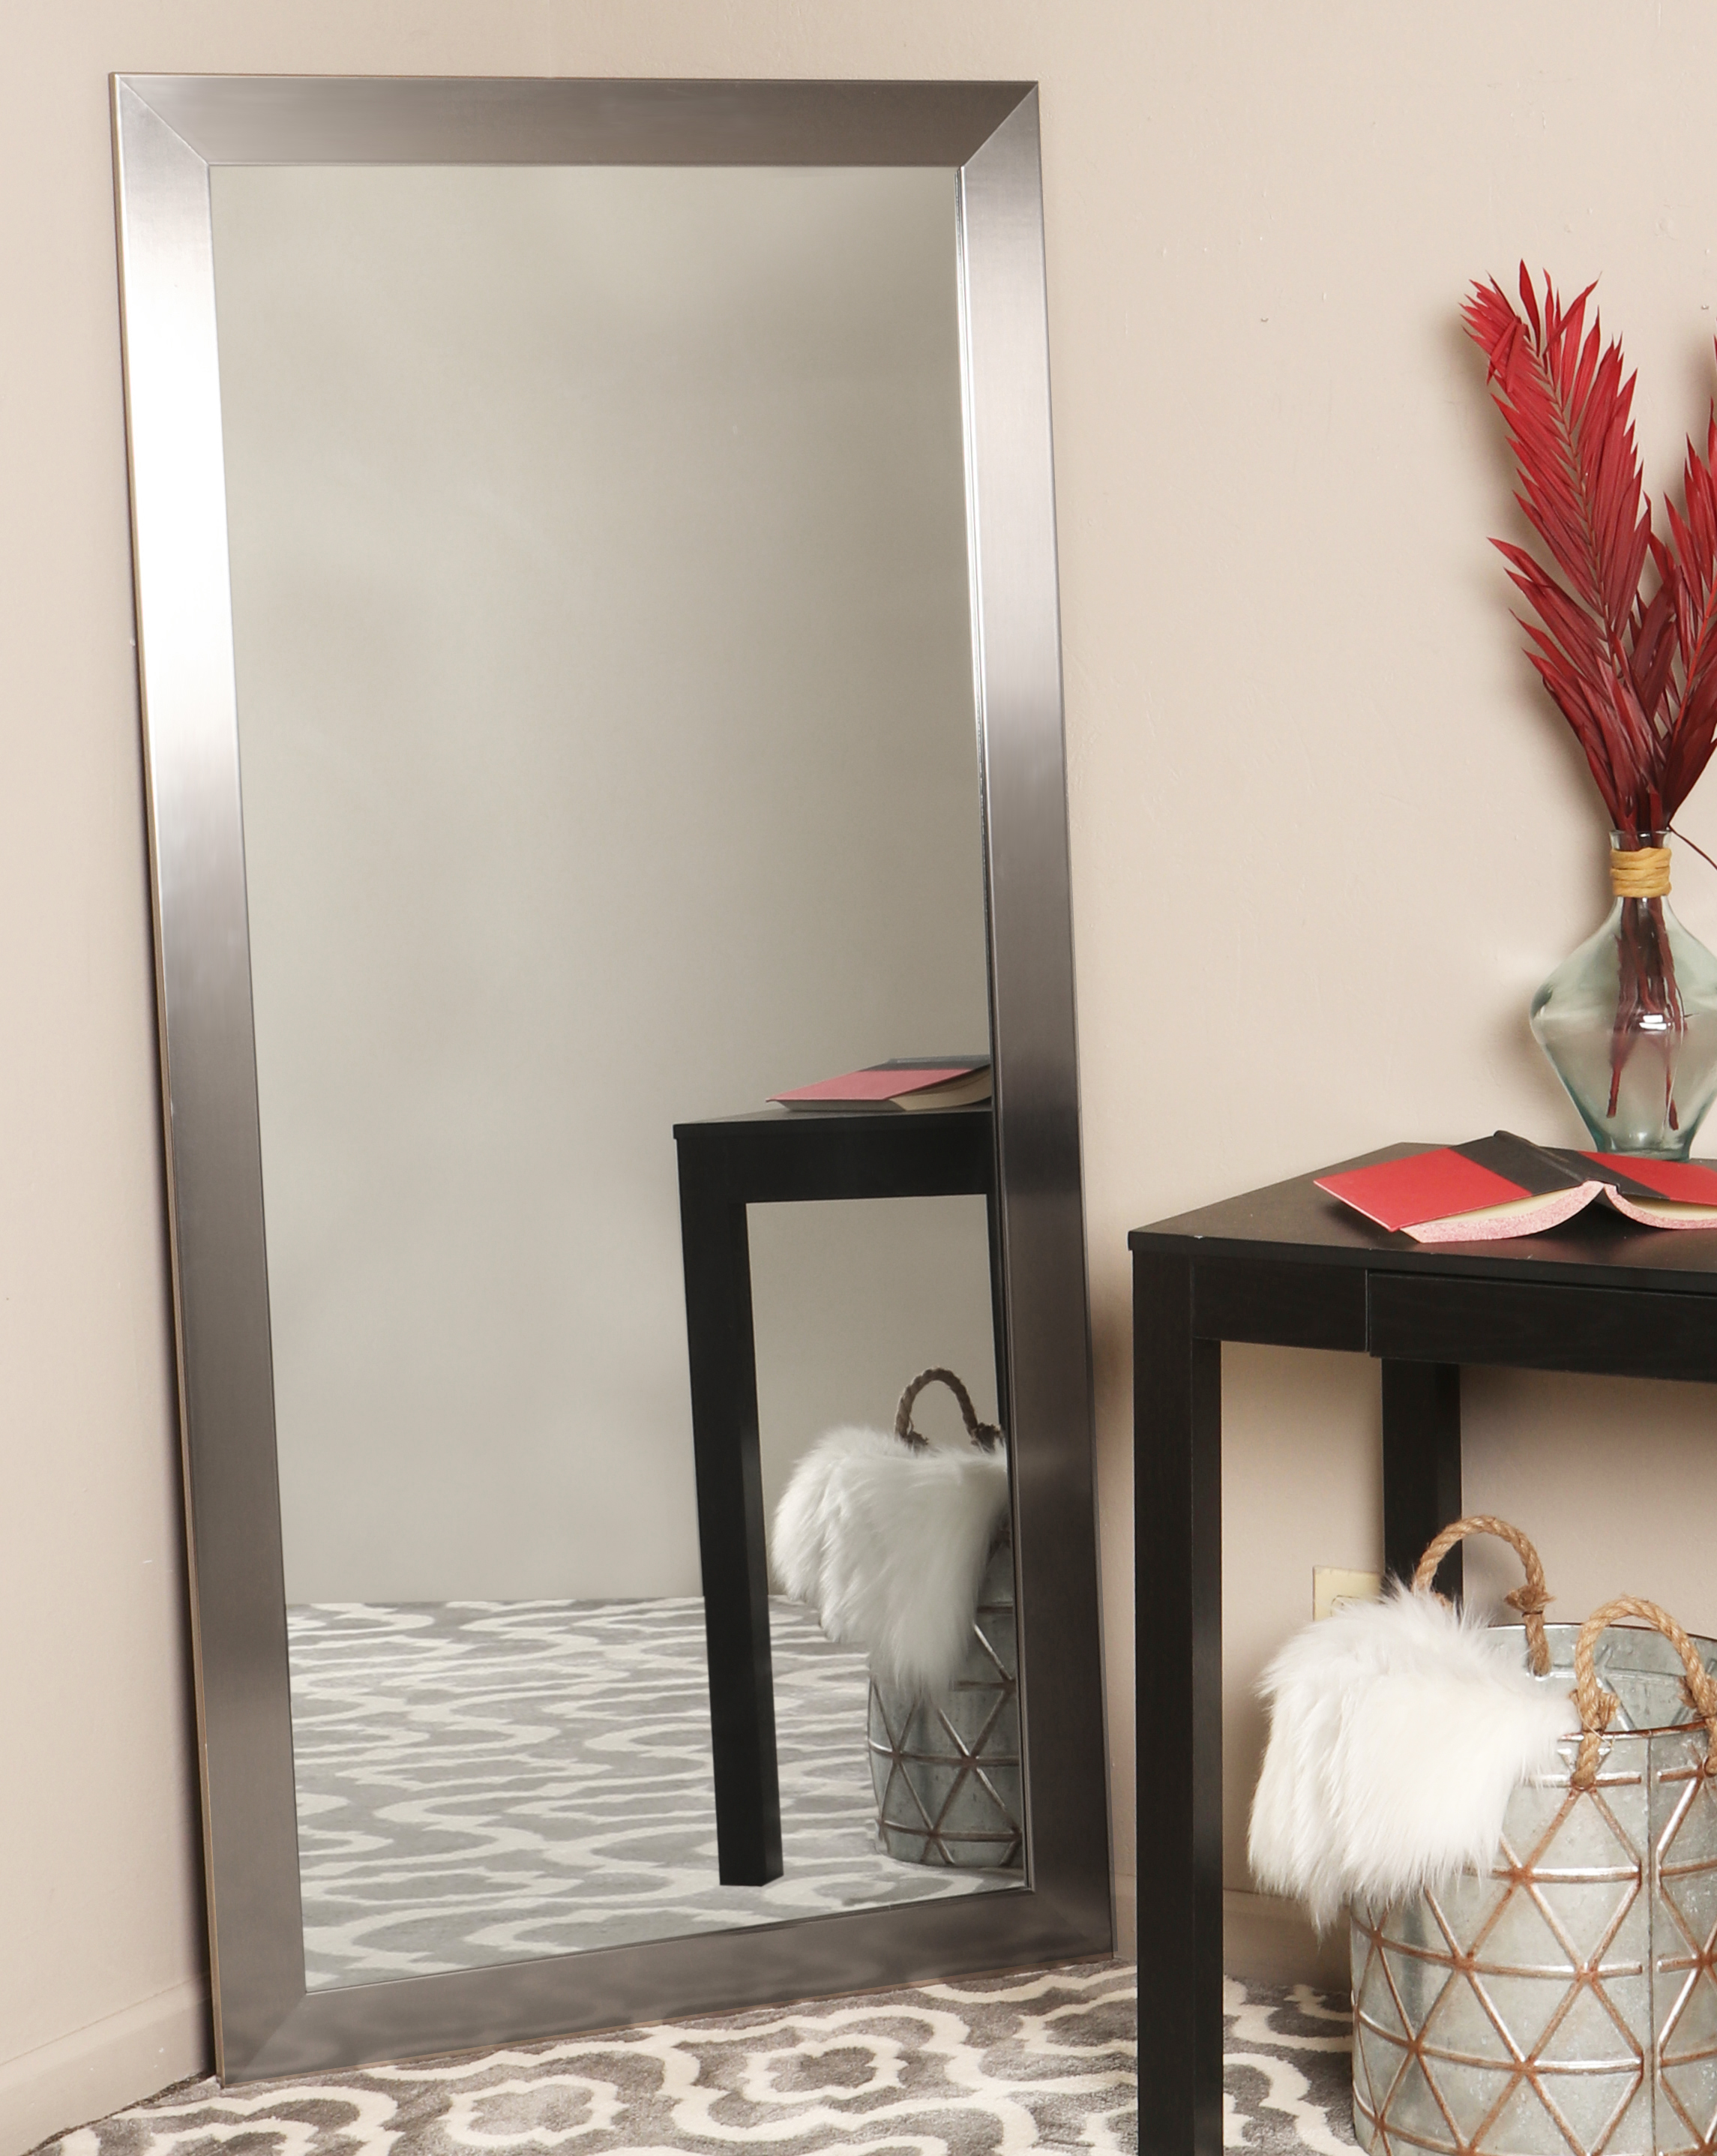 Tall Wall Mirror: Reflection Of Style And Elegance